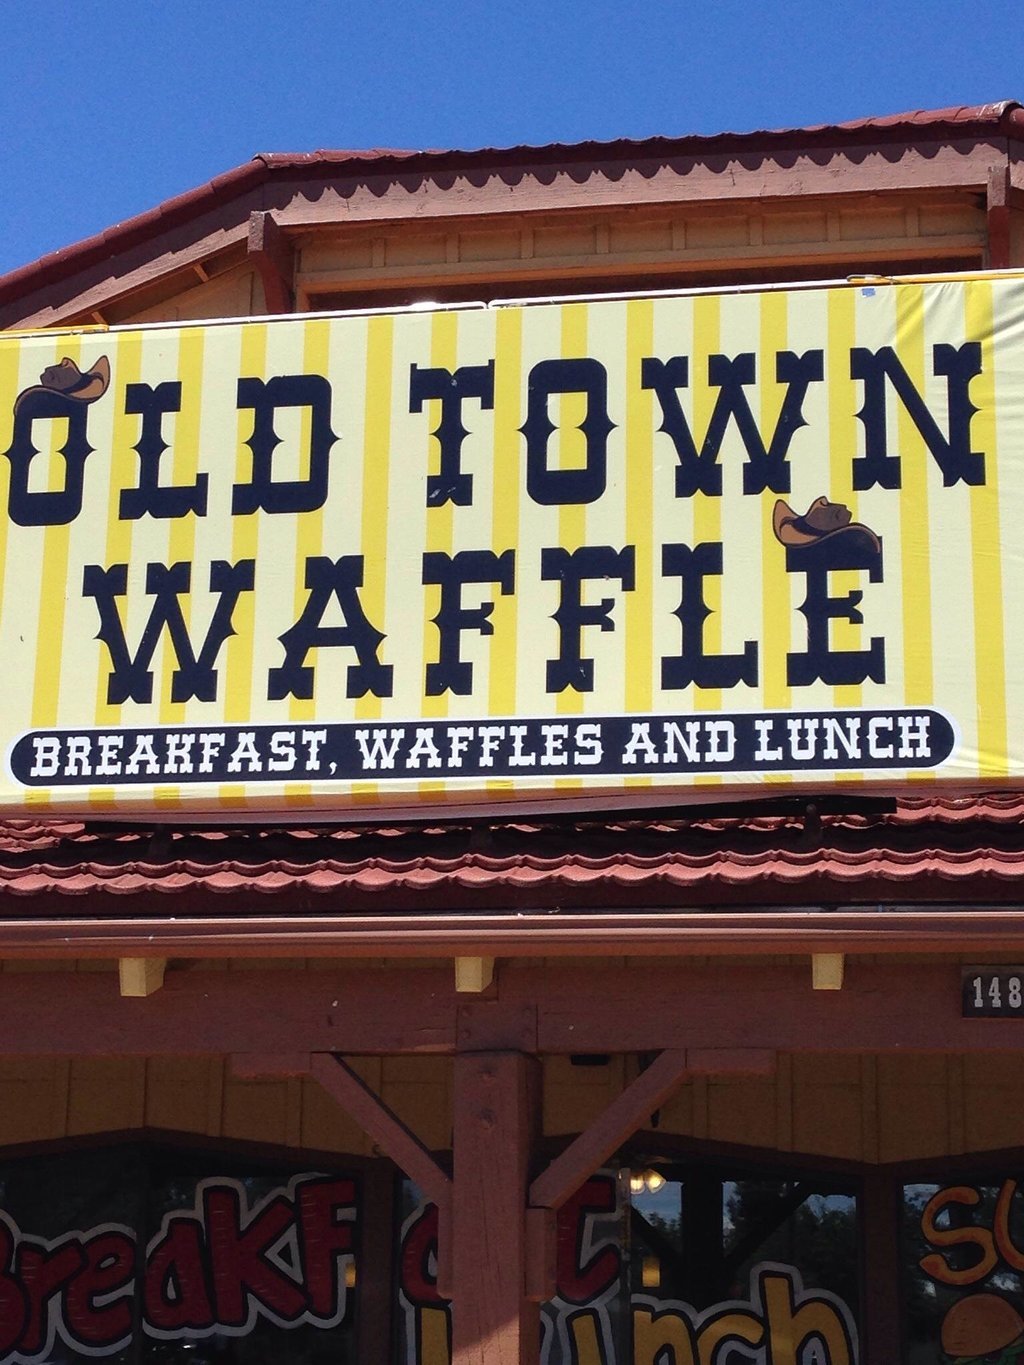 Old Town Waffles